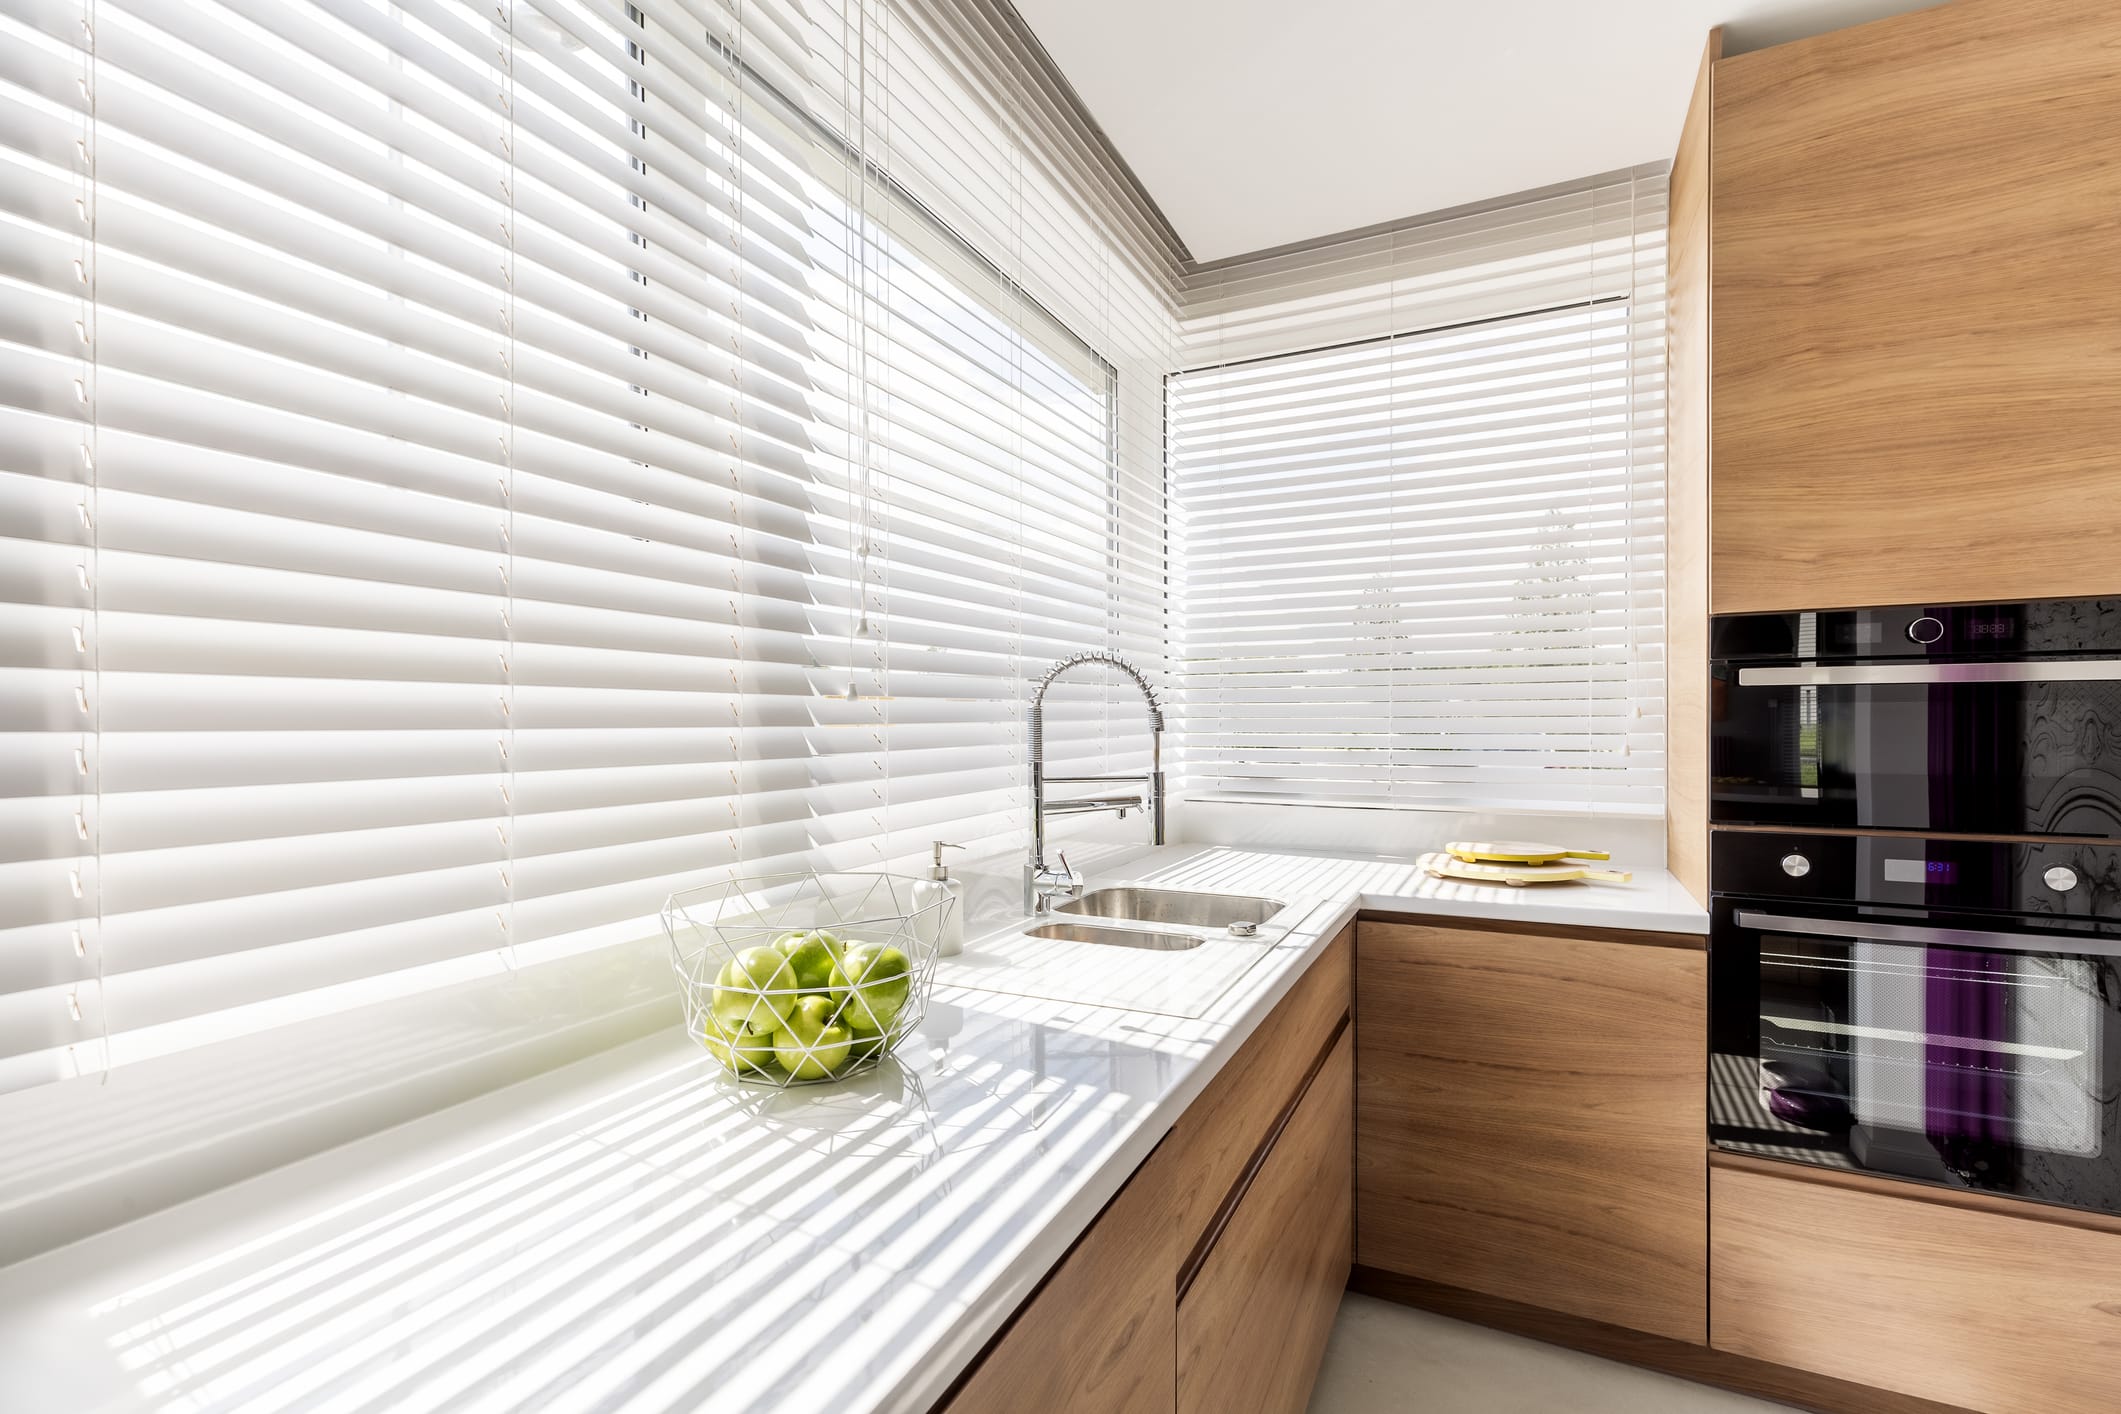 Real wood blinds